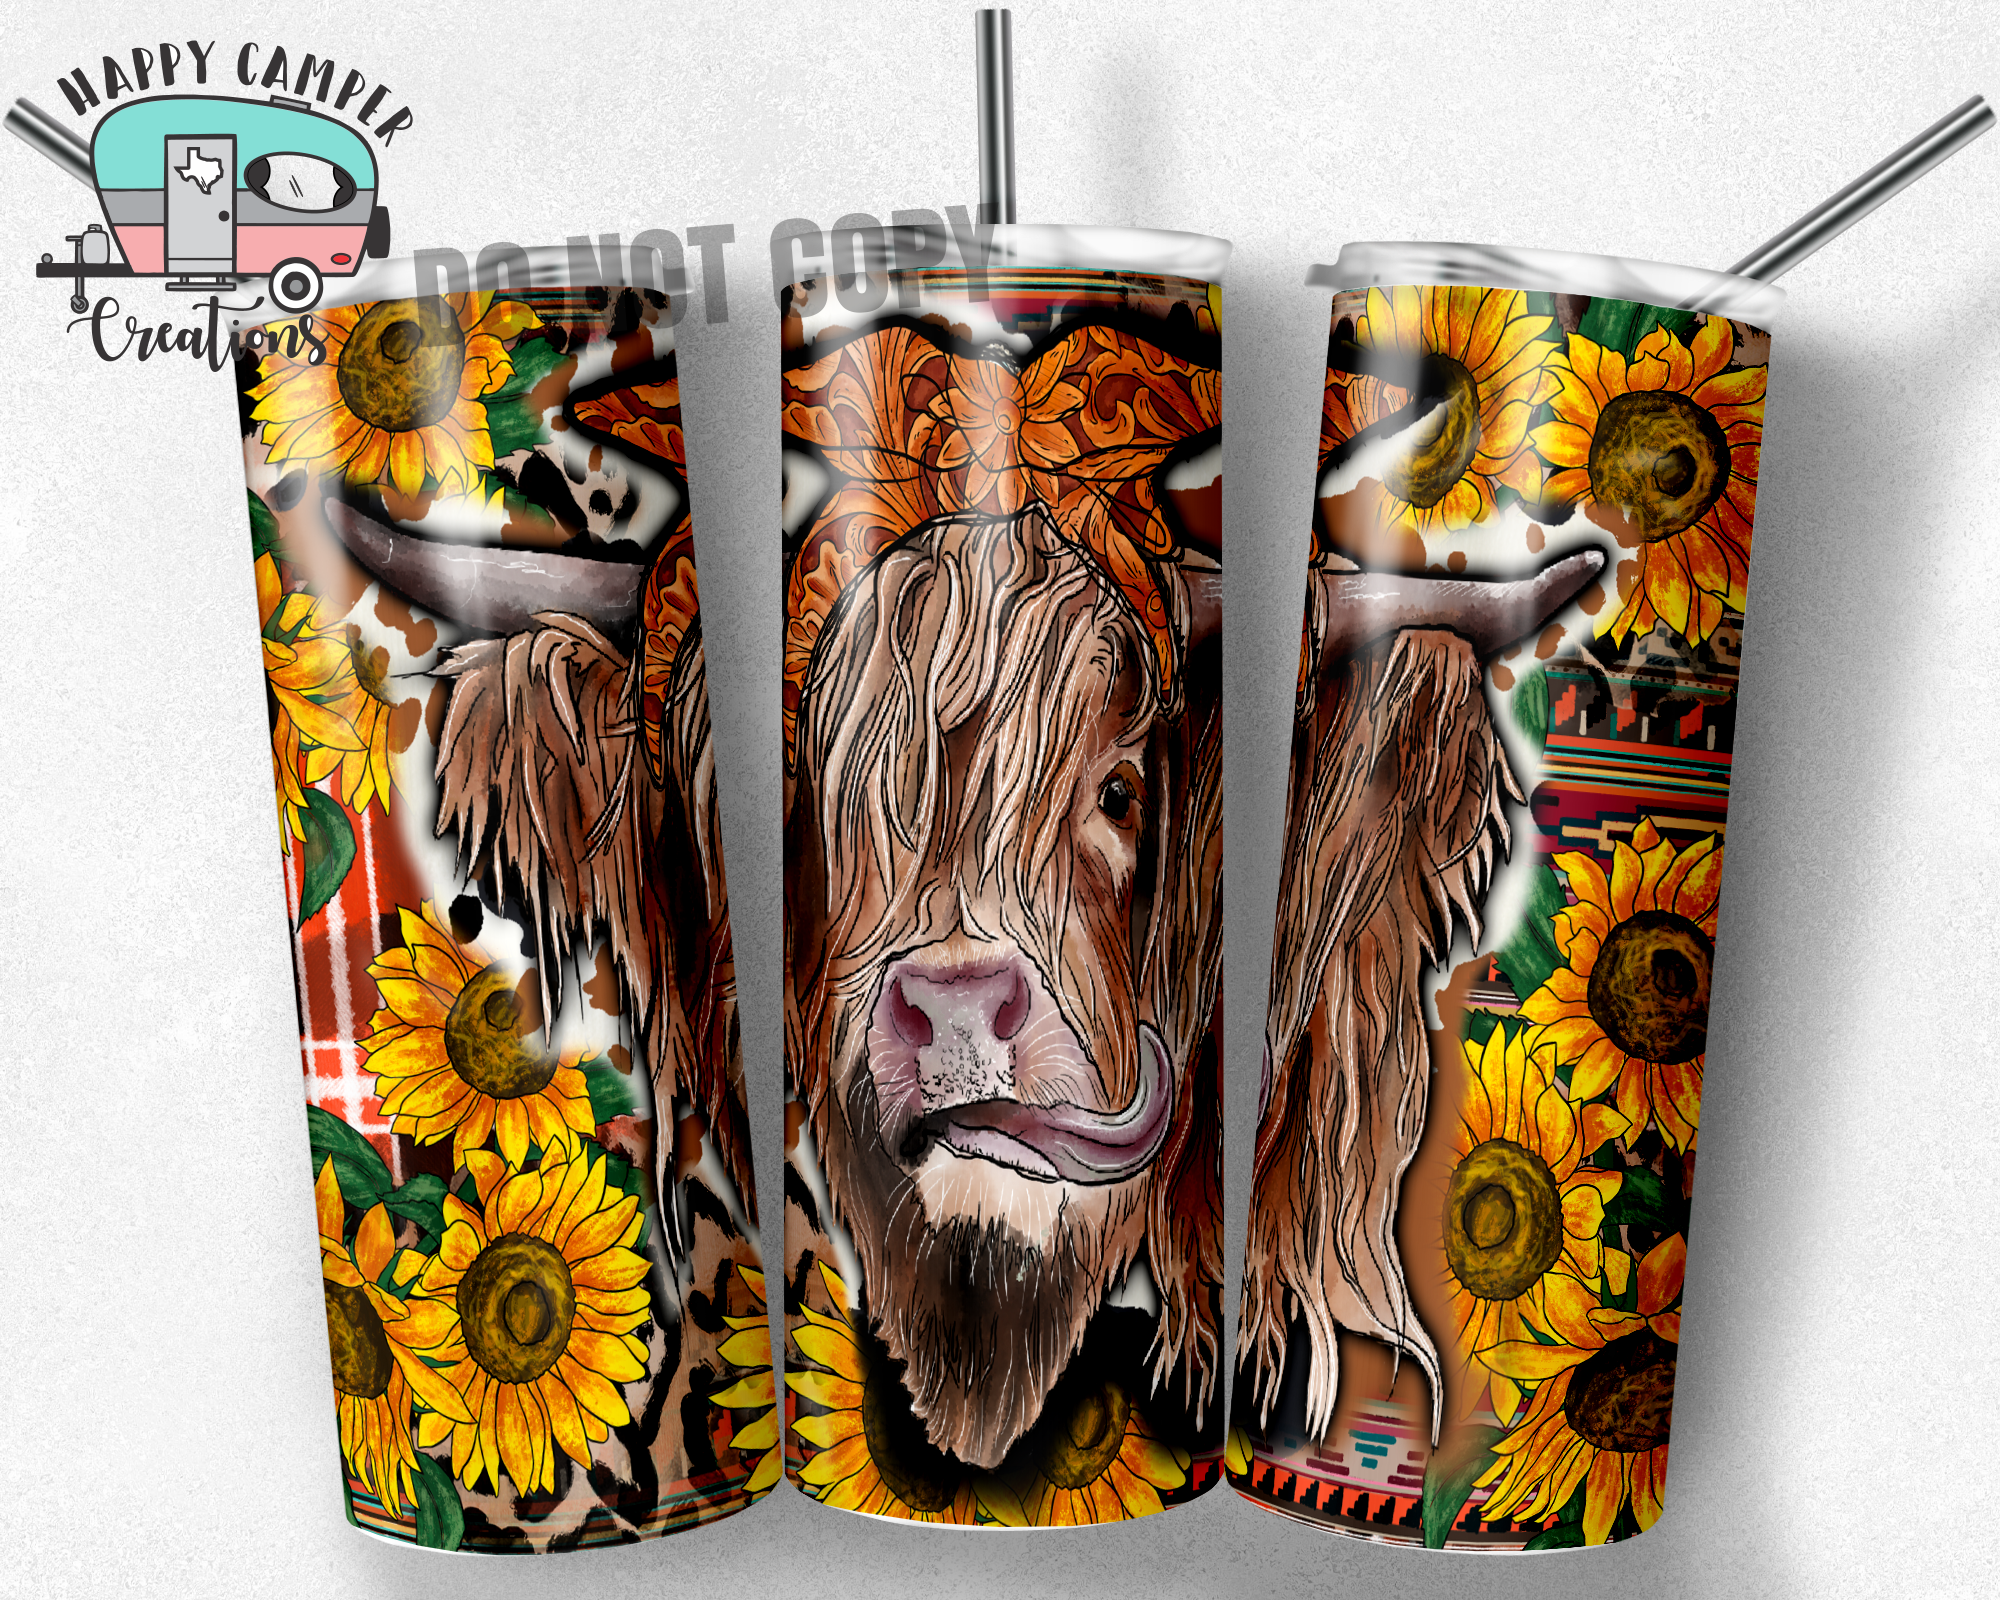 Personalized Sloth Hippie Be Happy Stainless Steel Skinny Tumbler